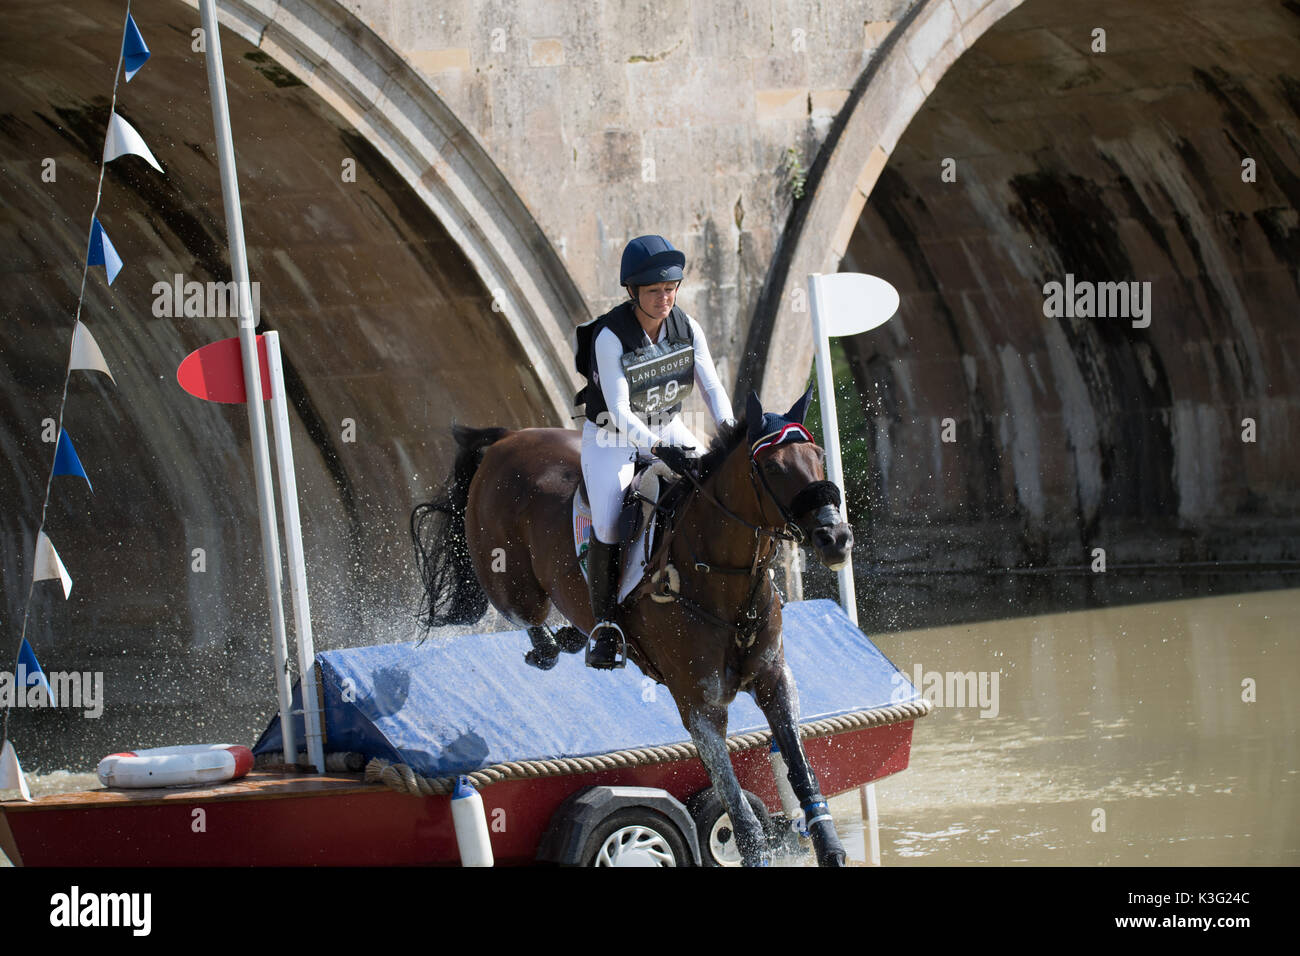 Stamford, Lincs, UK. 02nd Sep, 2017. Lynn Symanski riding Donner at landrover Burghley Horse trials cross country event on 02/09/2017 Credit: steve Brownley/Alamy Live News Stock Photo